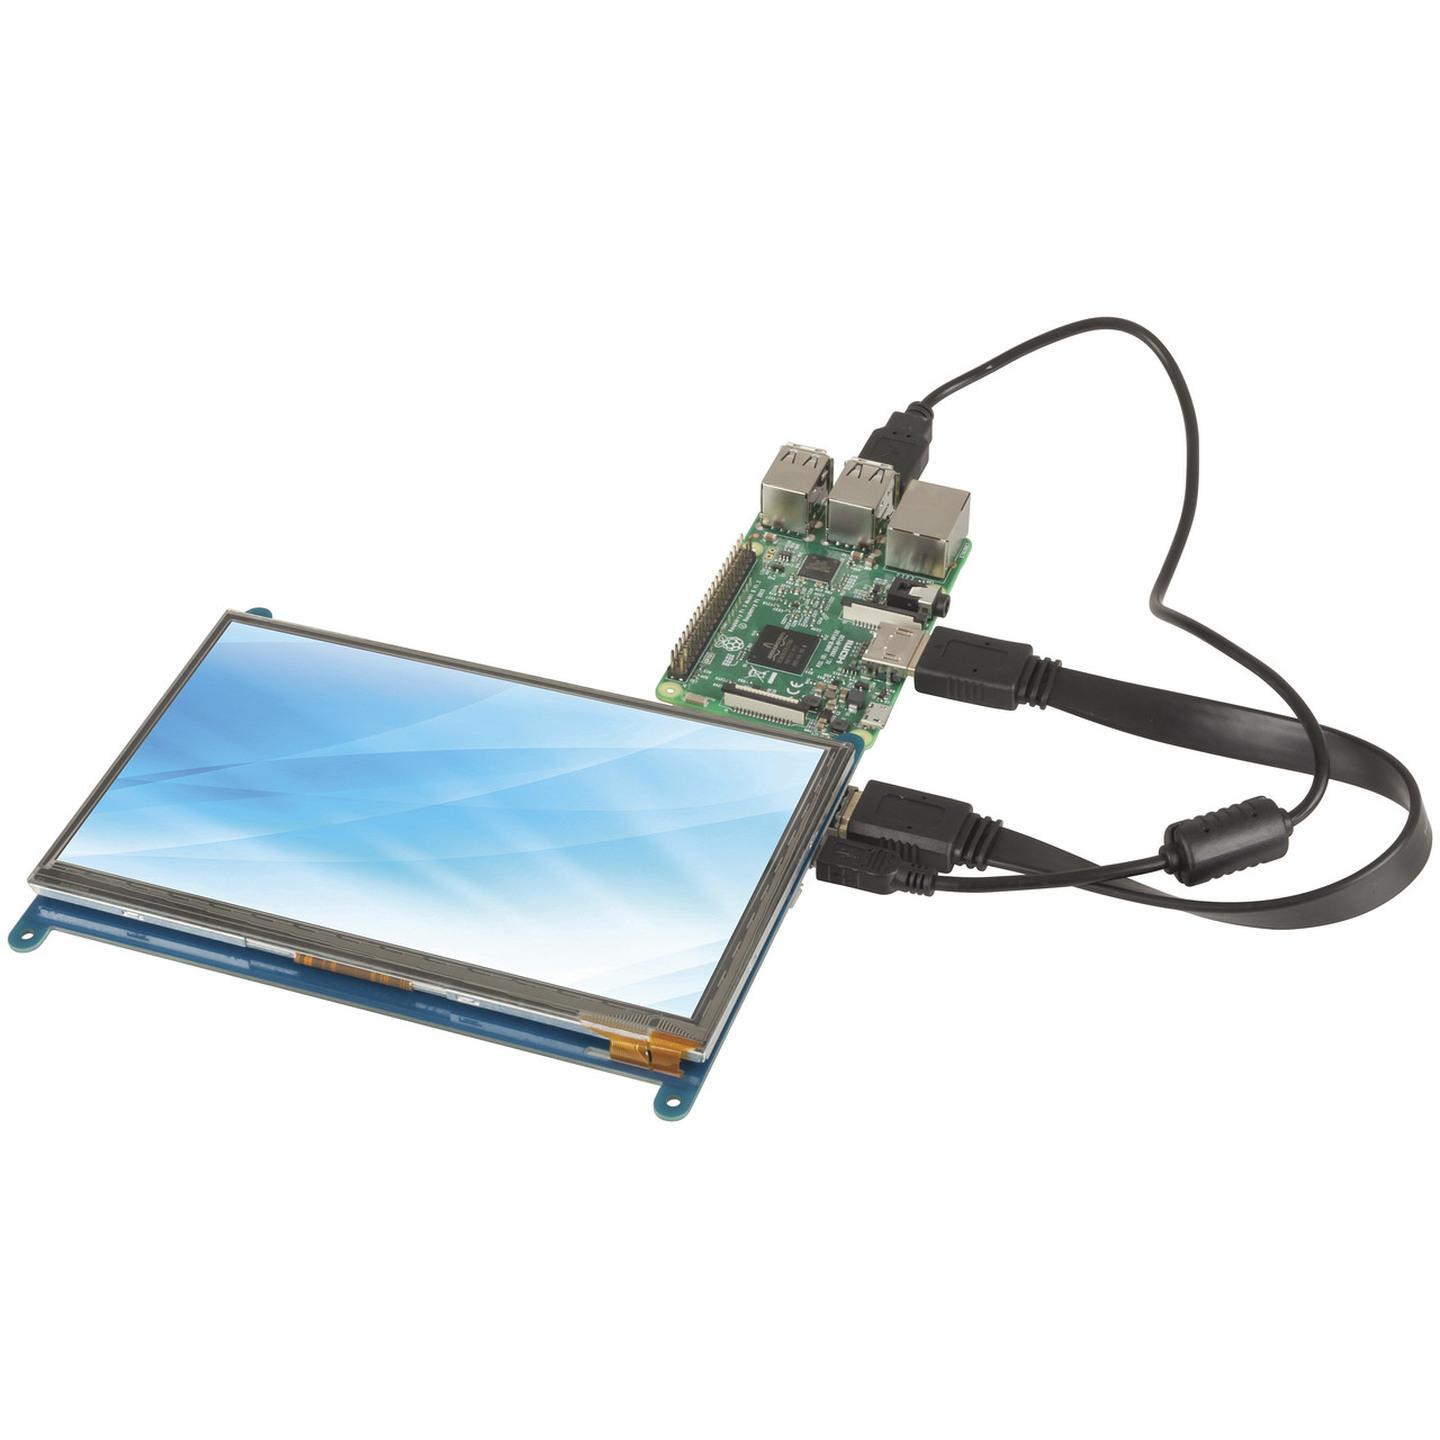 1024x600 HDMI 7in Screen with USB Capacitive Touch